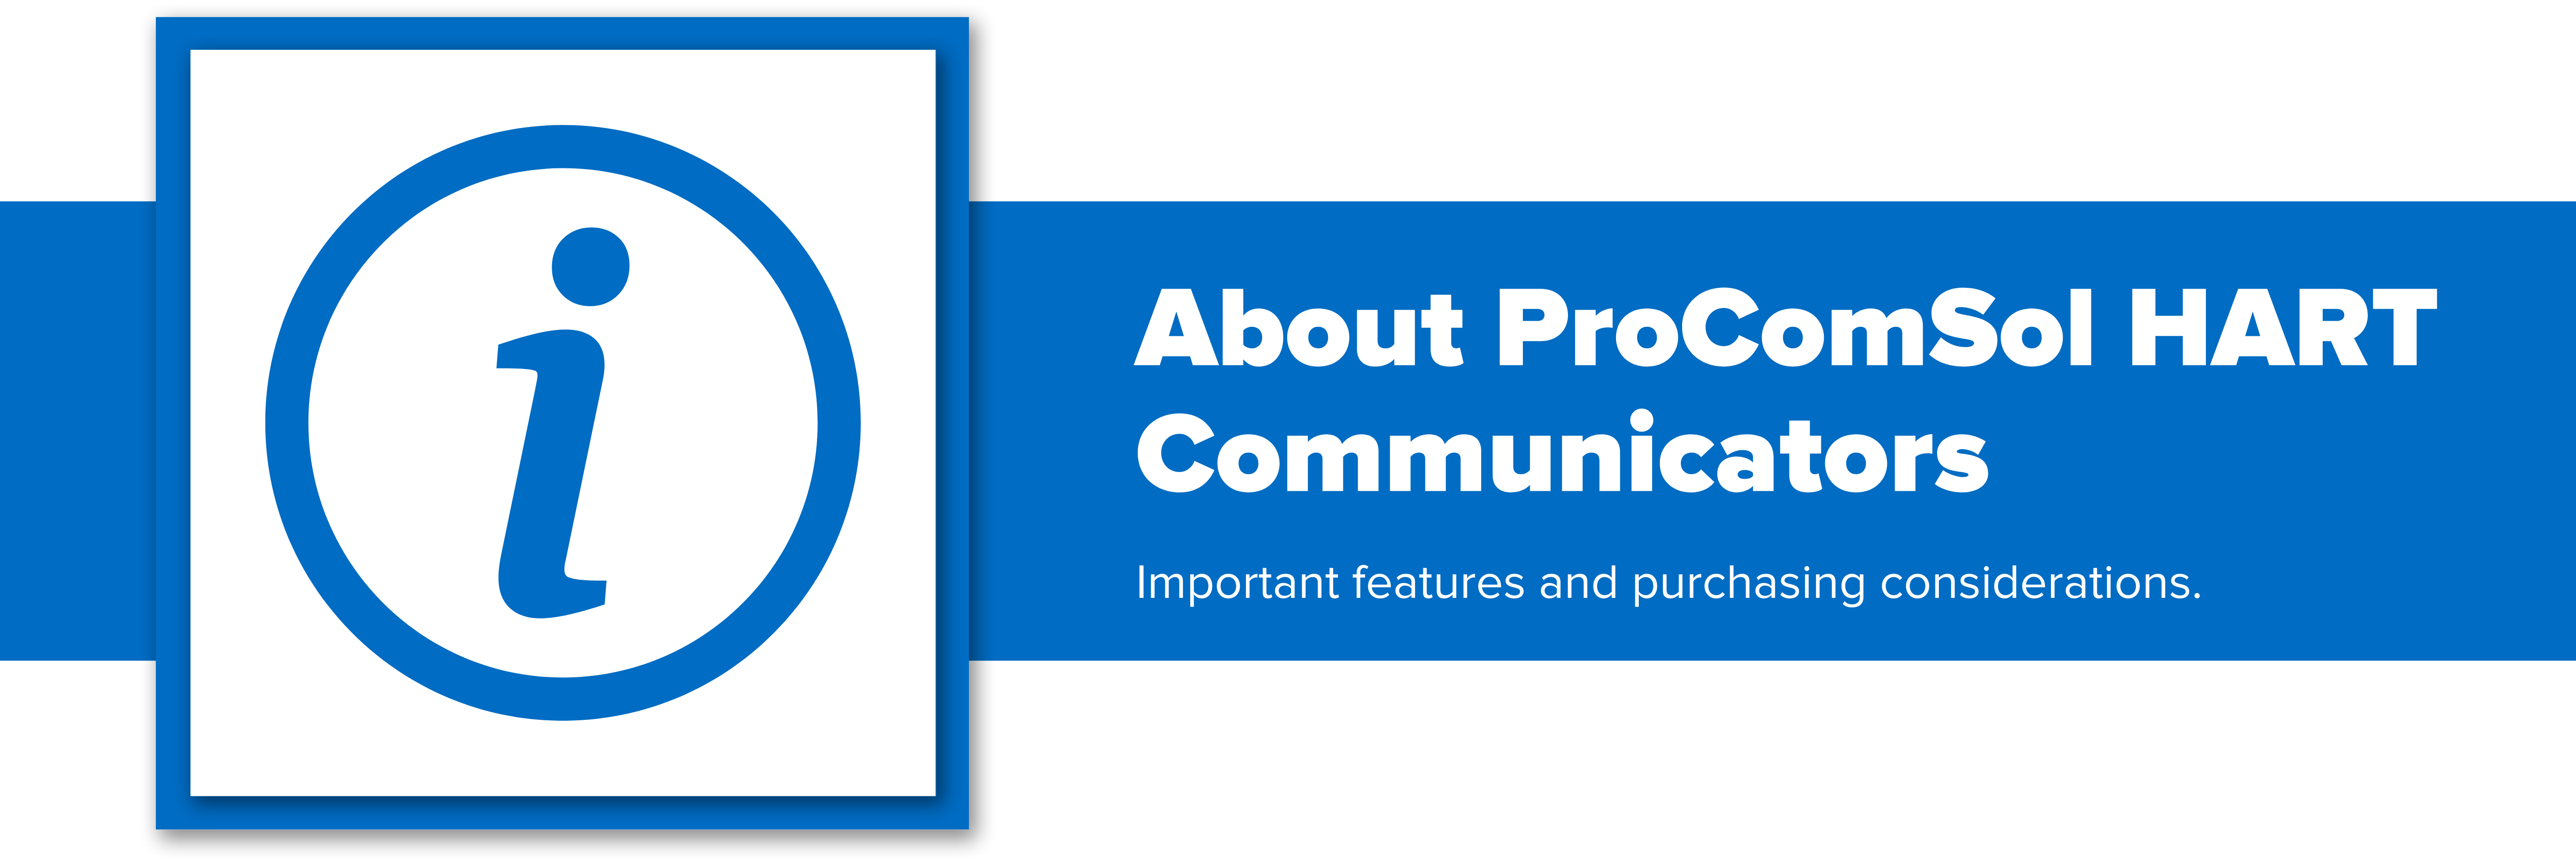 Header image with text "Learn More About ProComSol HART Communicators"